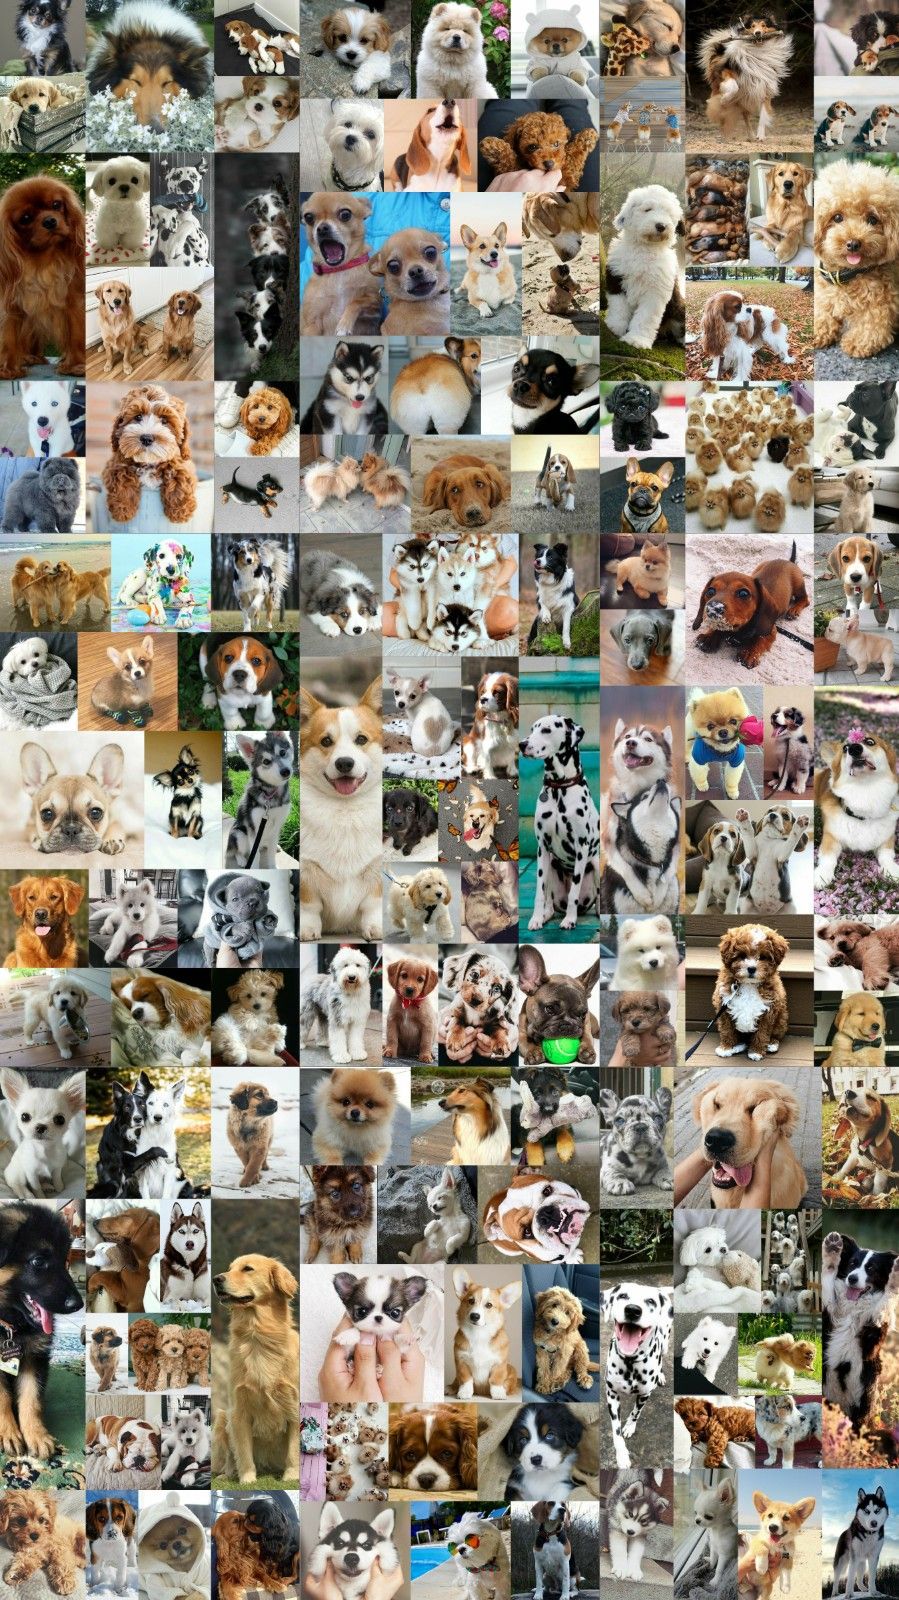 Wallpaper, background, collage, aesthetic, dogs, pets, puppy. Puppy wallpaper, Dog wallpaper, Puppies